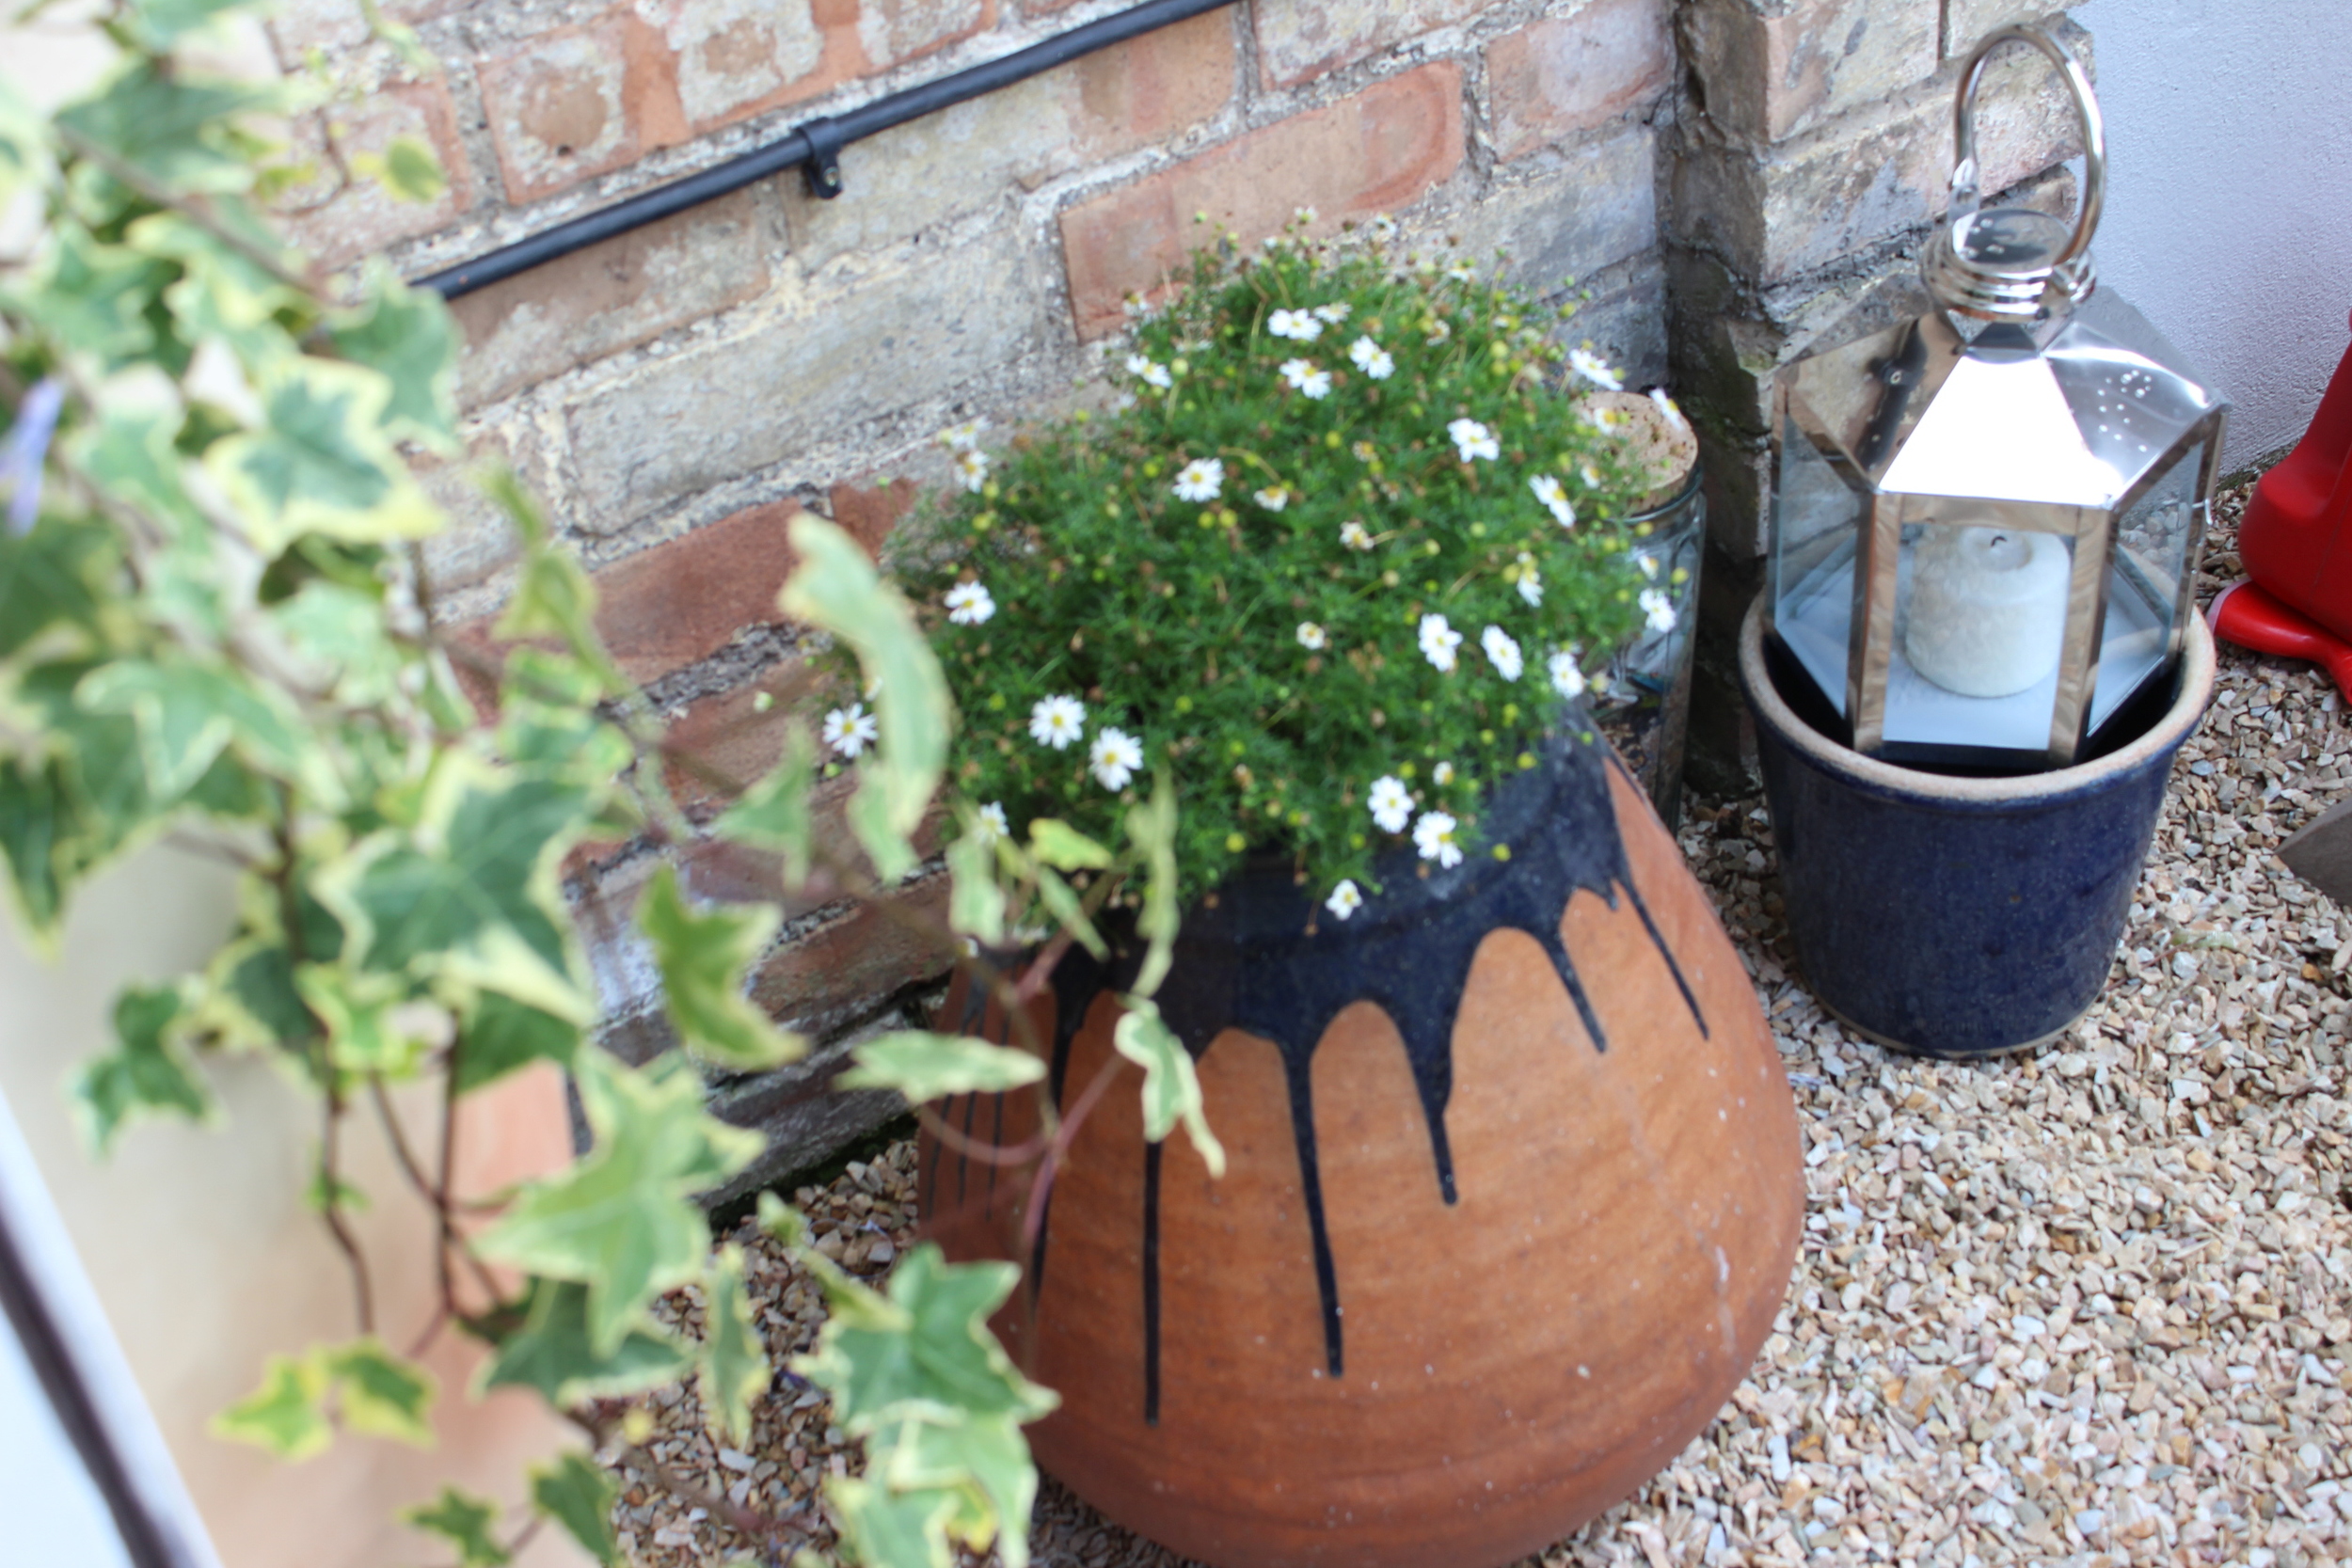 Pots and planters